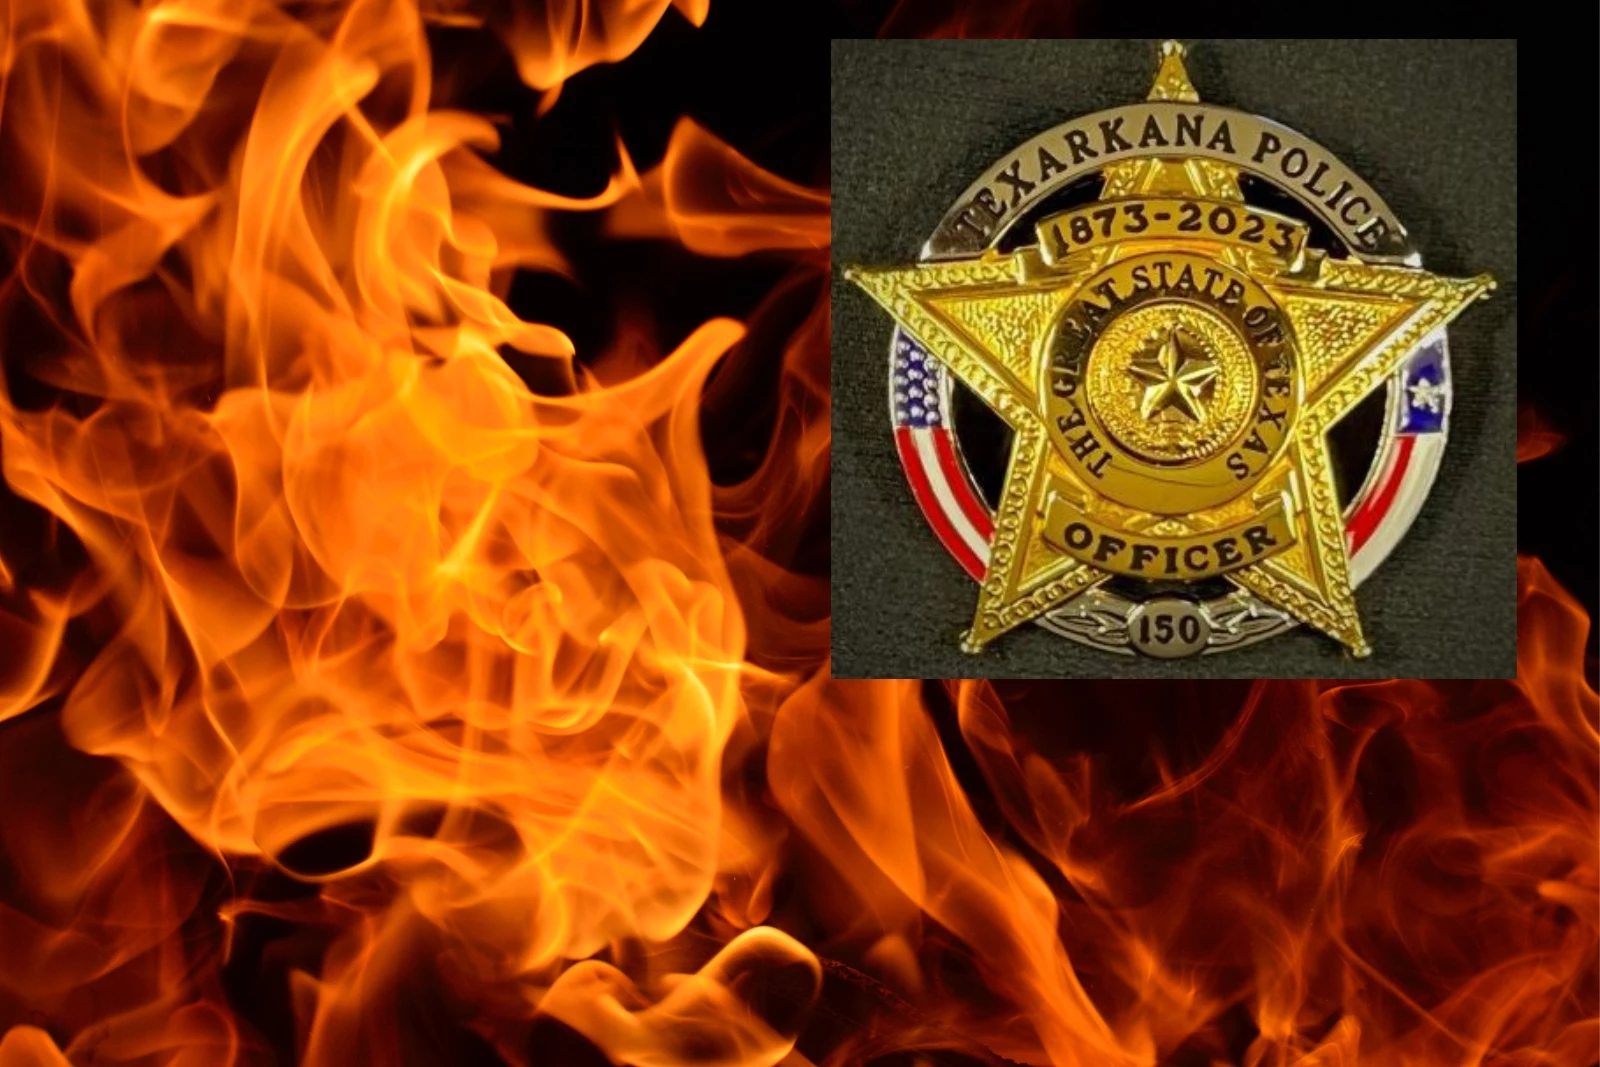 Texas-Side Officers Show Off New TXK150 Commemorative Badges